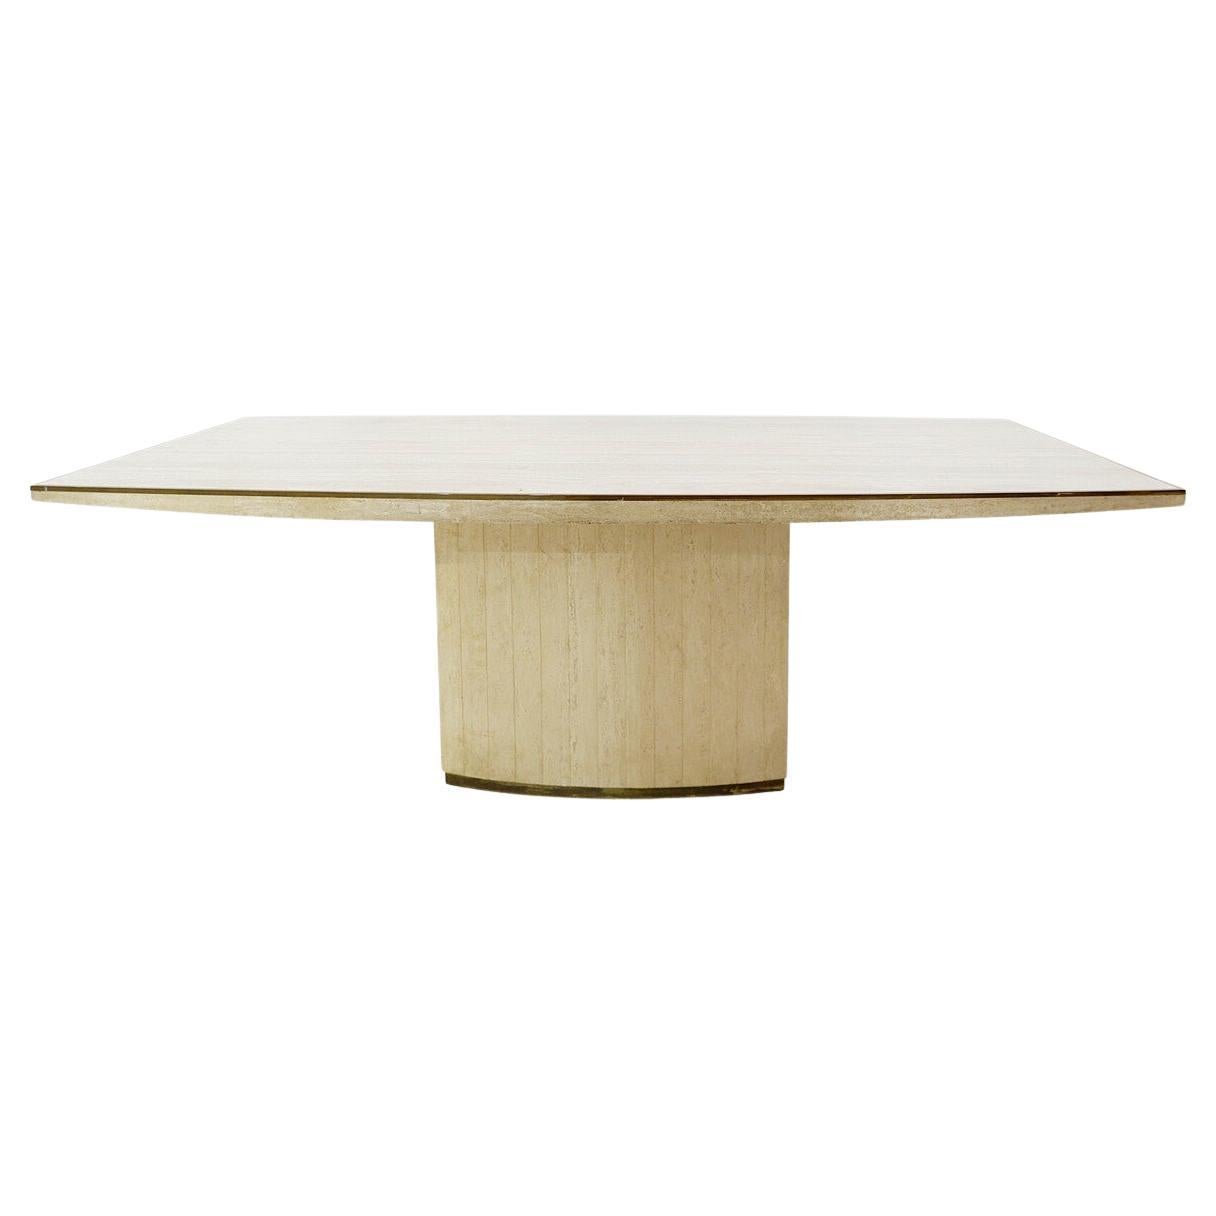 Willy Rizzo Travertine Dining Table, 1970s